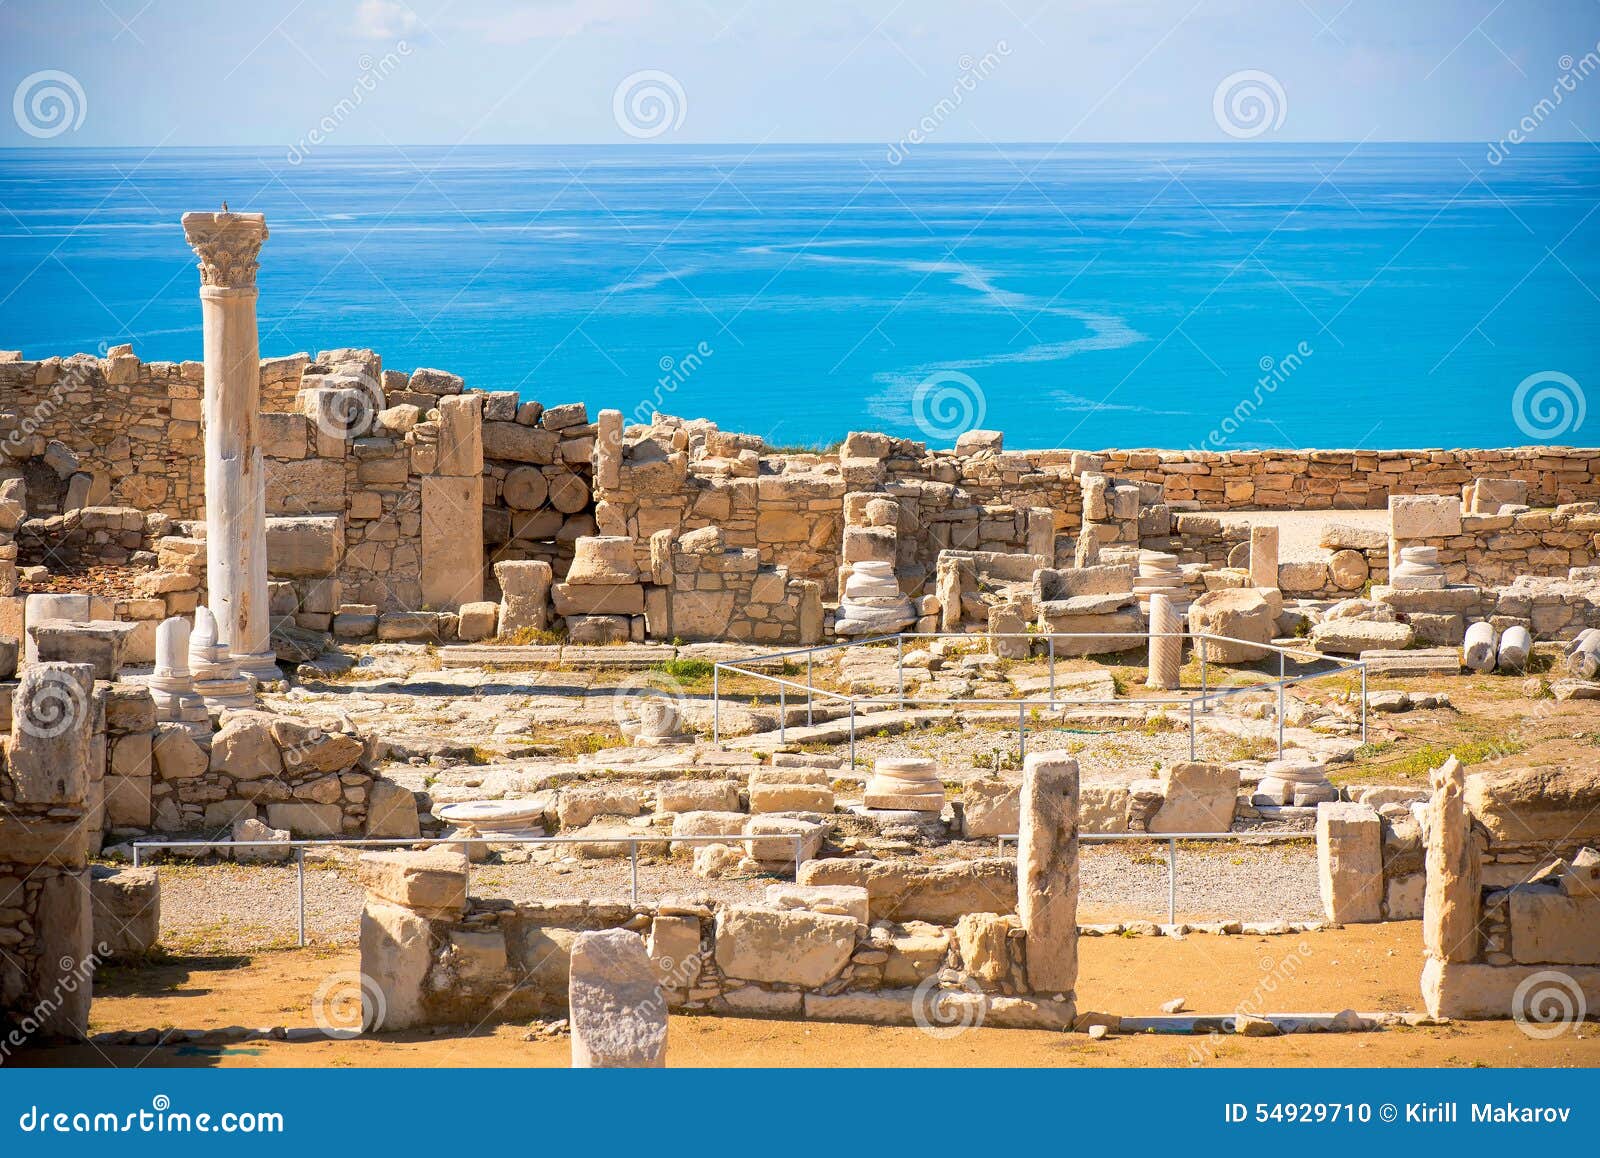 ruins of ancient kourion. limassol district. cyprus